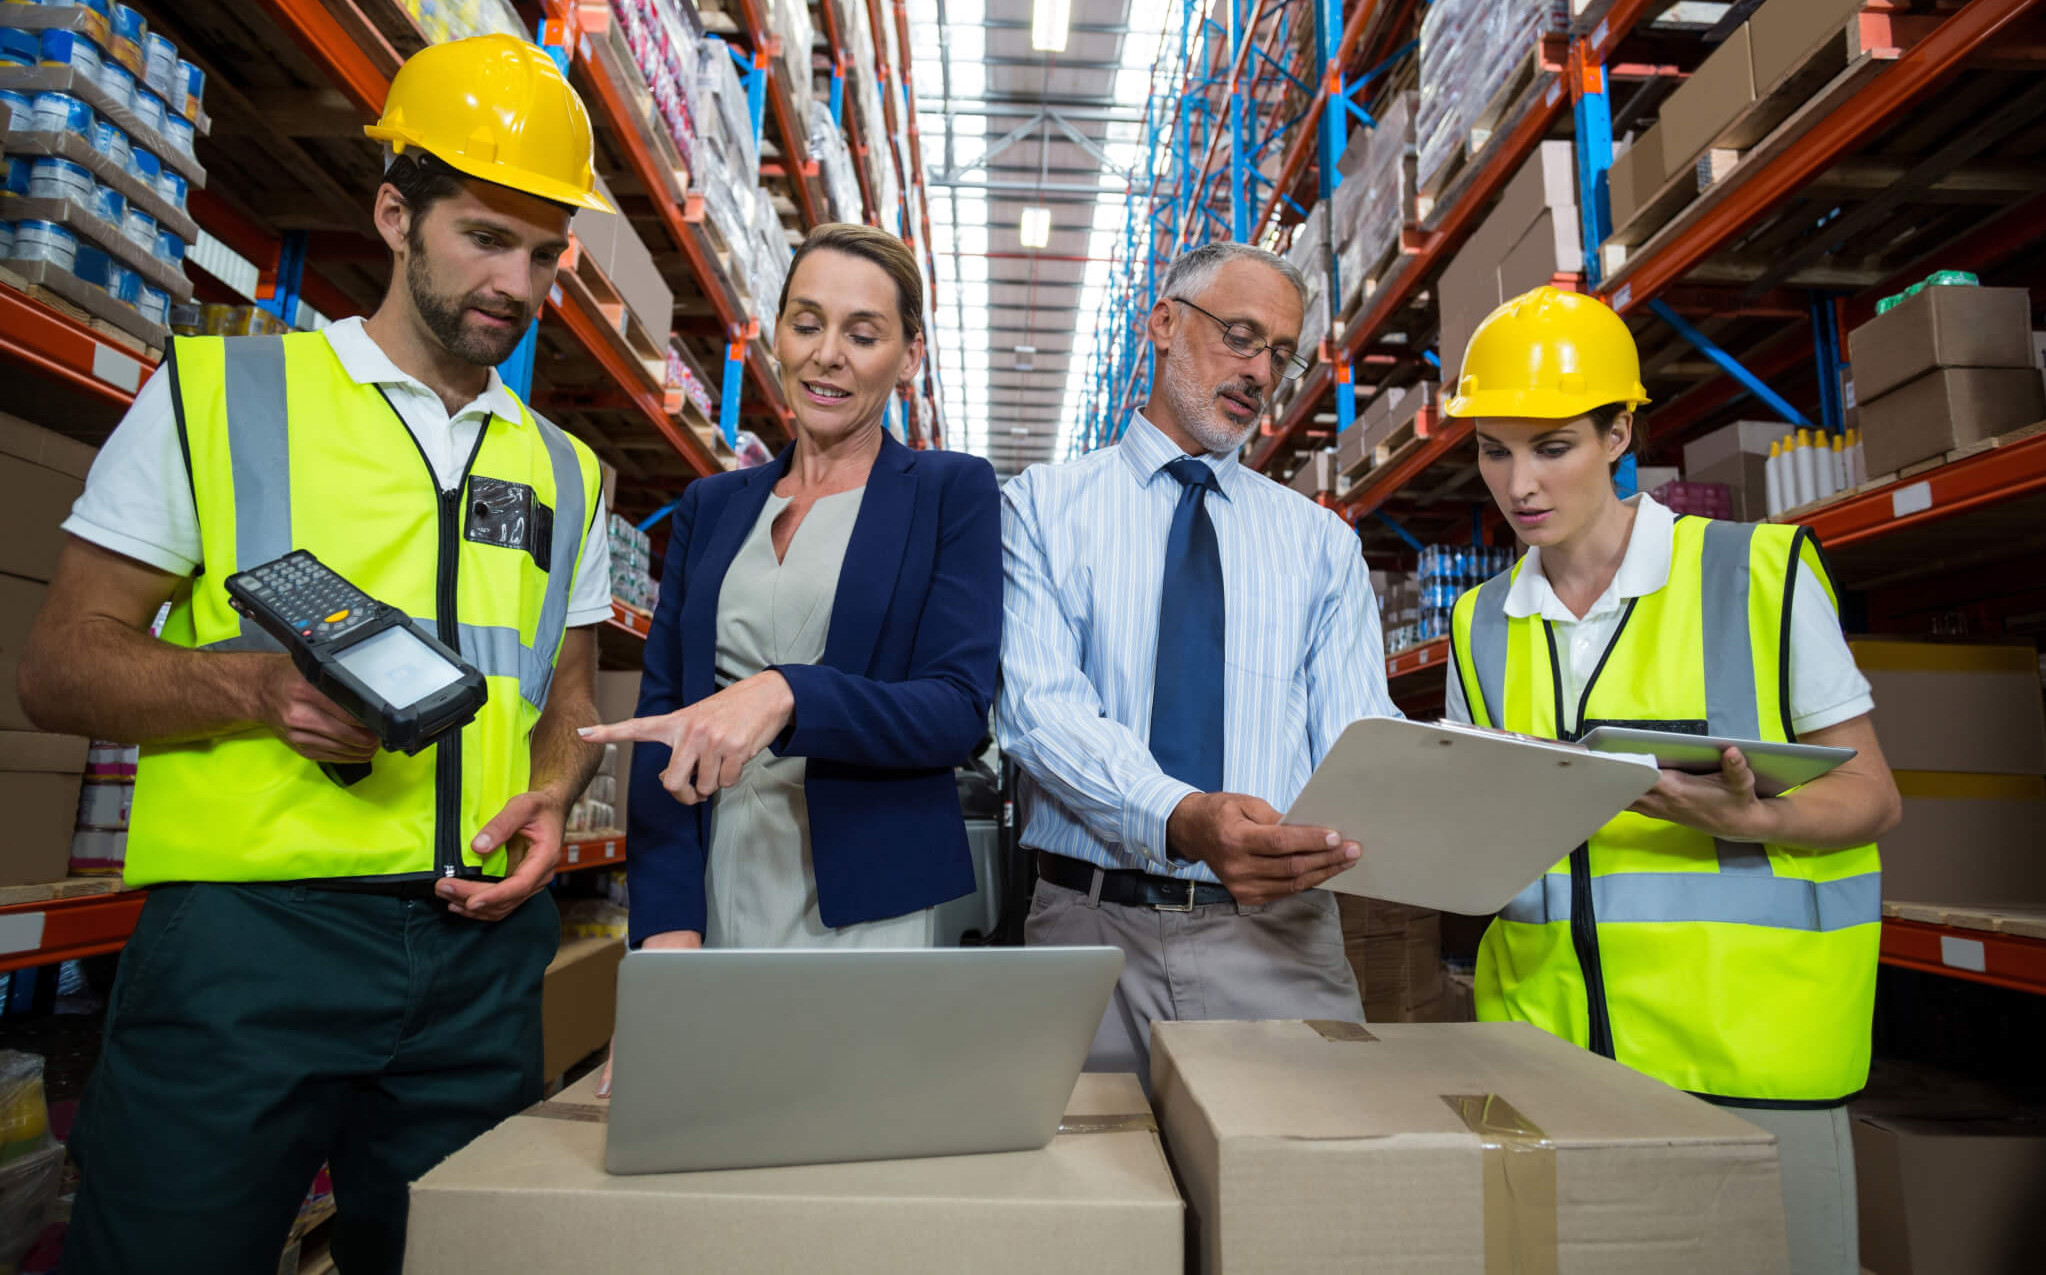 Selecting a Warehouse Management System (WMS) Checklist